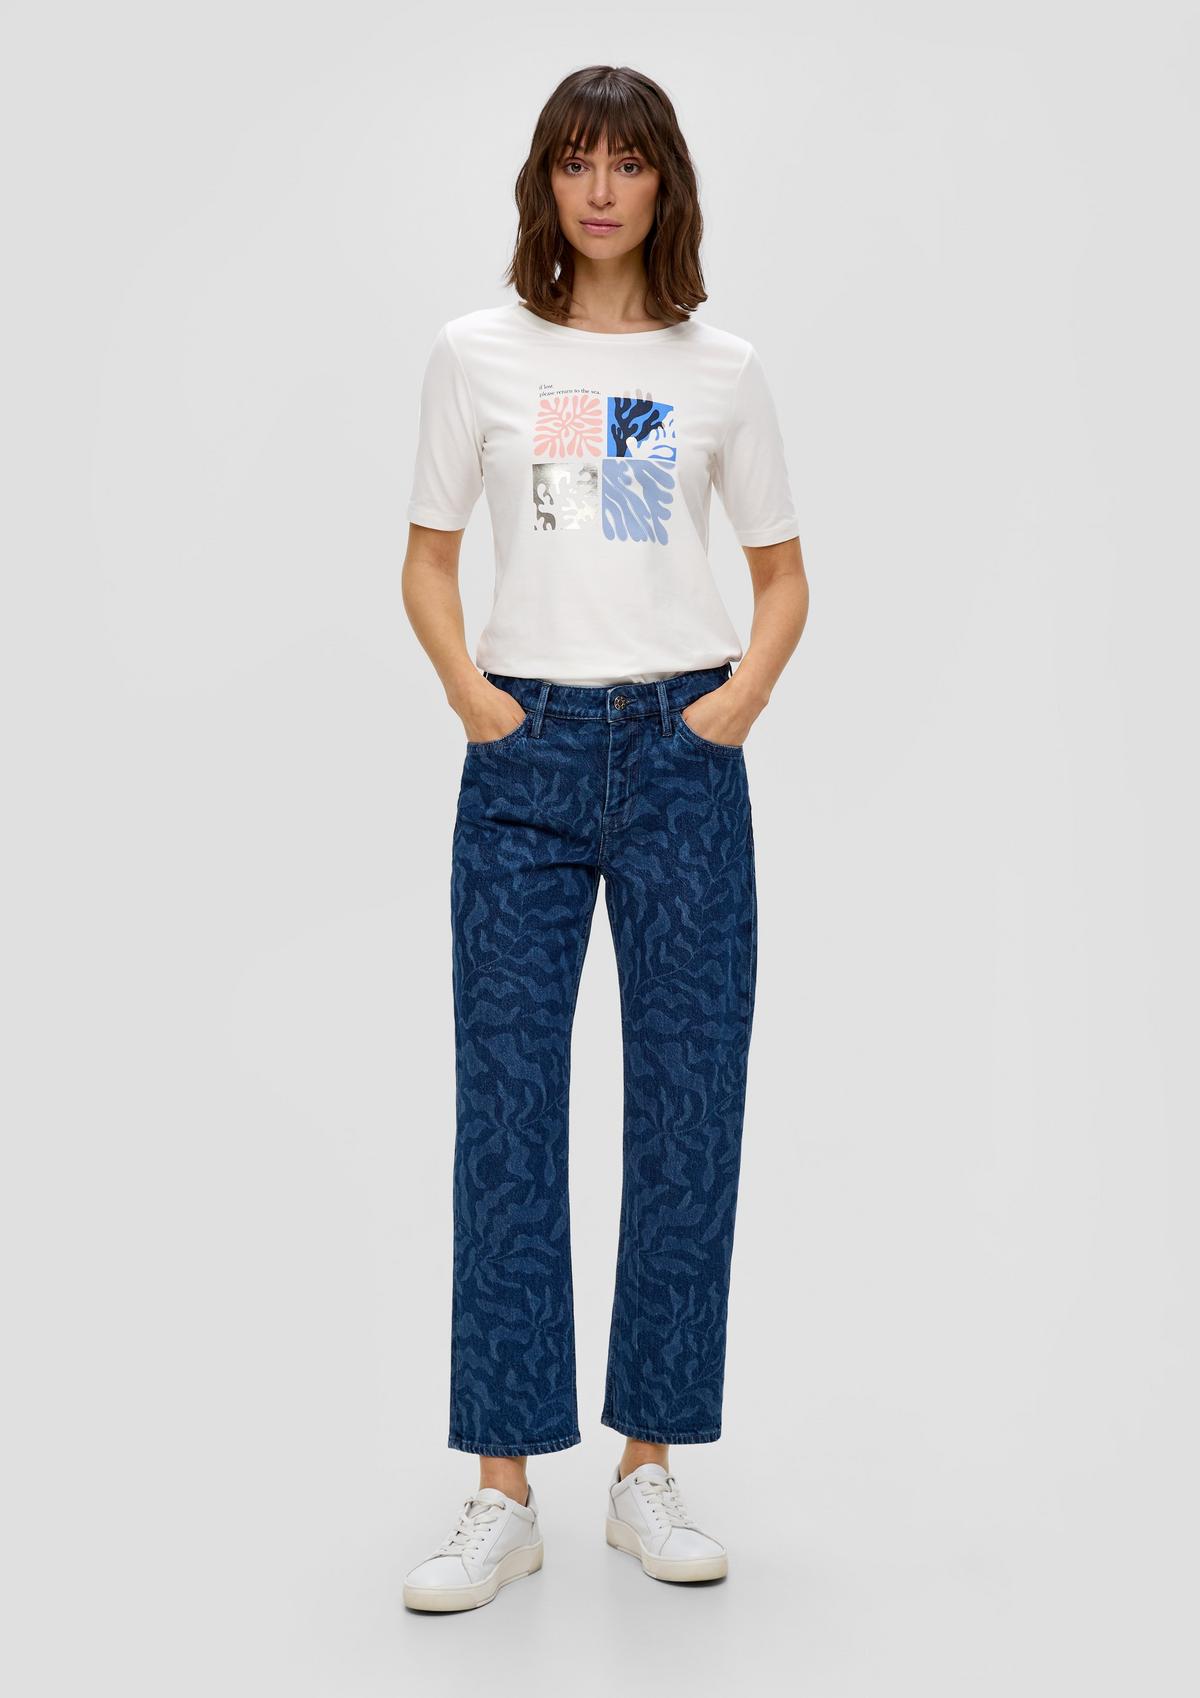 Karolin cropped jeans / regular fit / mid rise / straight leg / all-over pattern